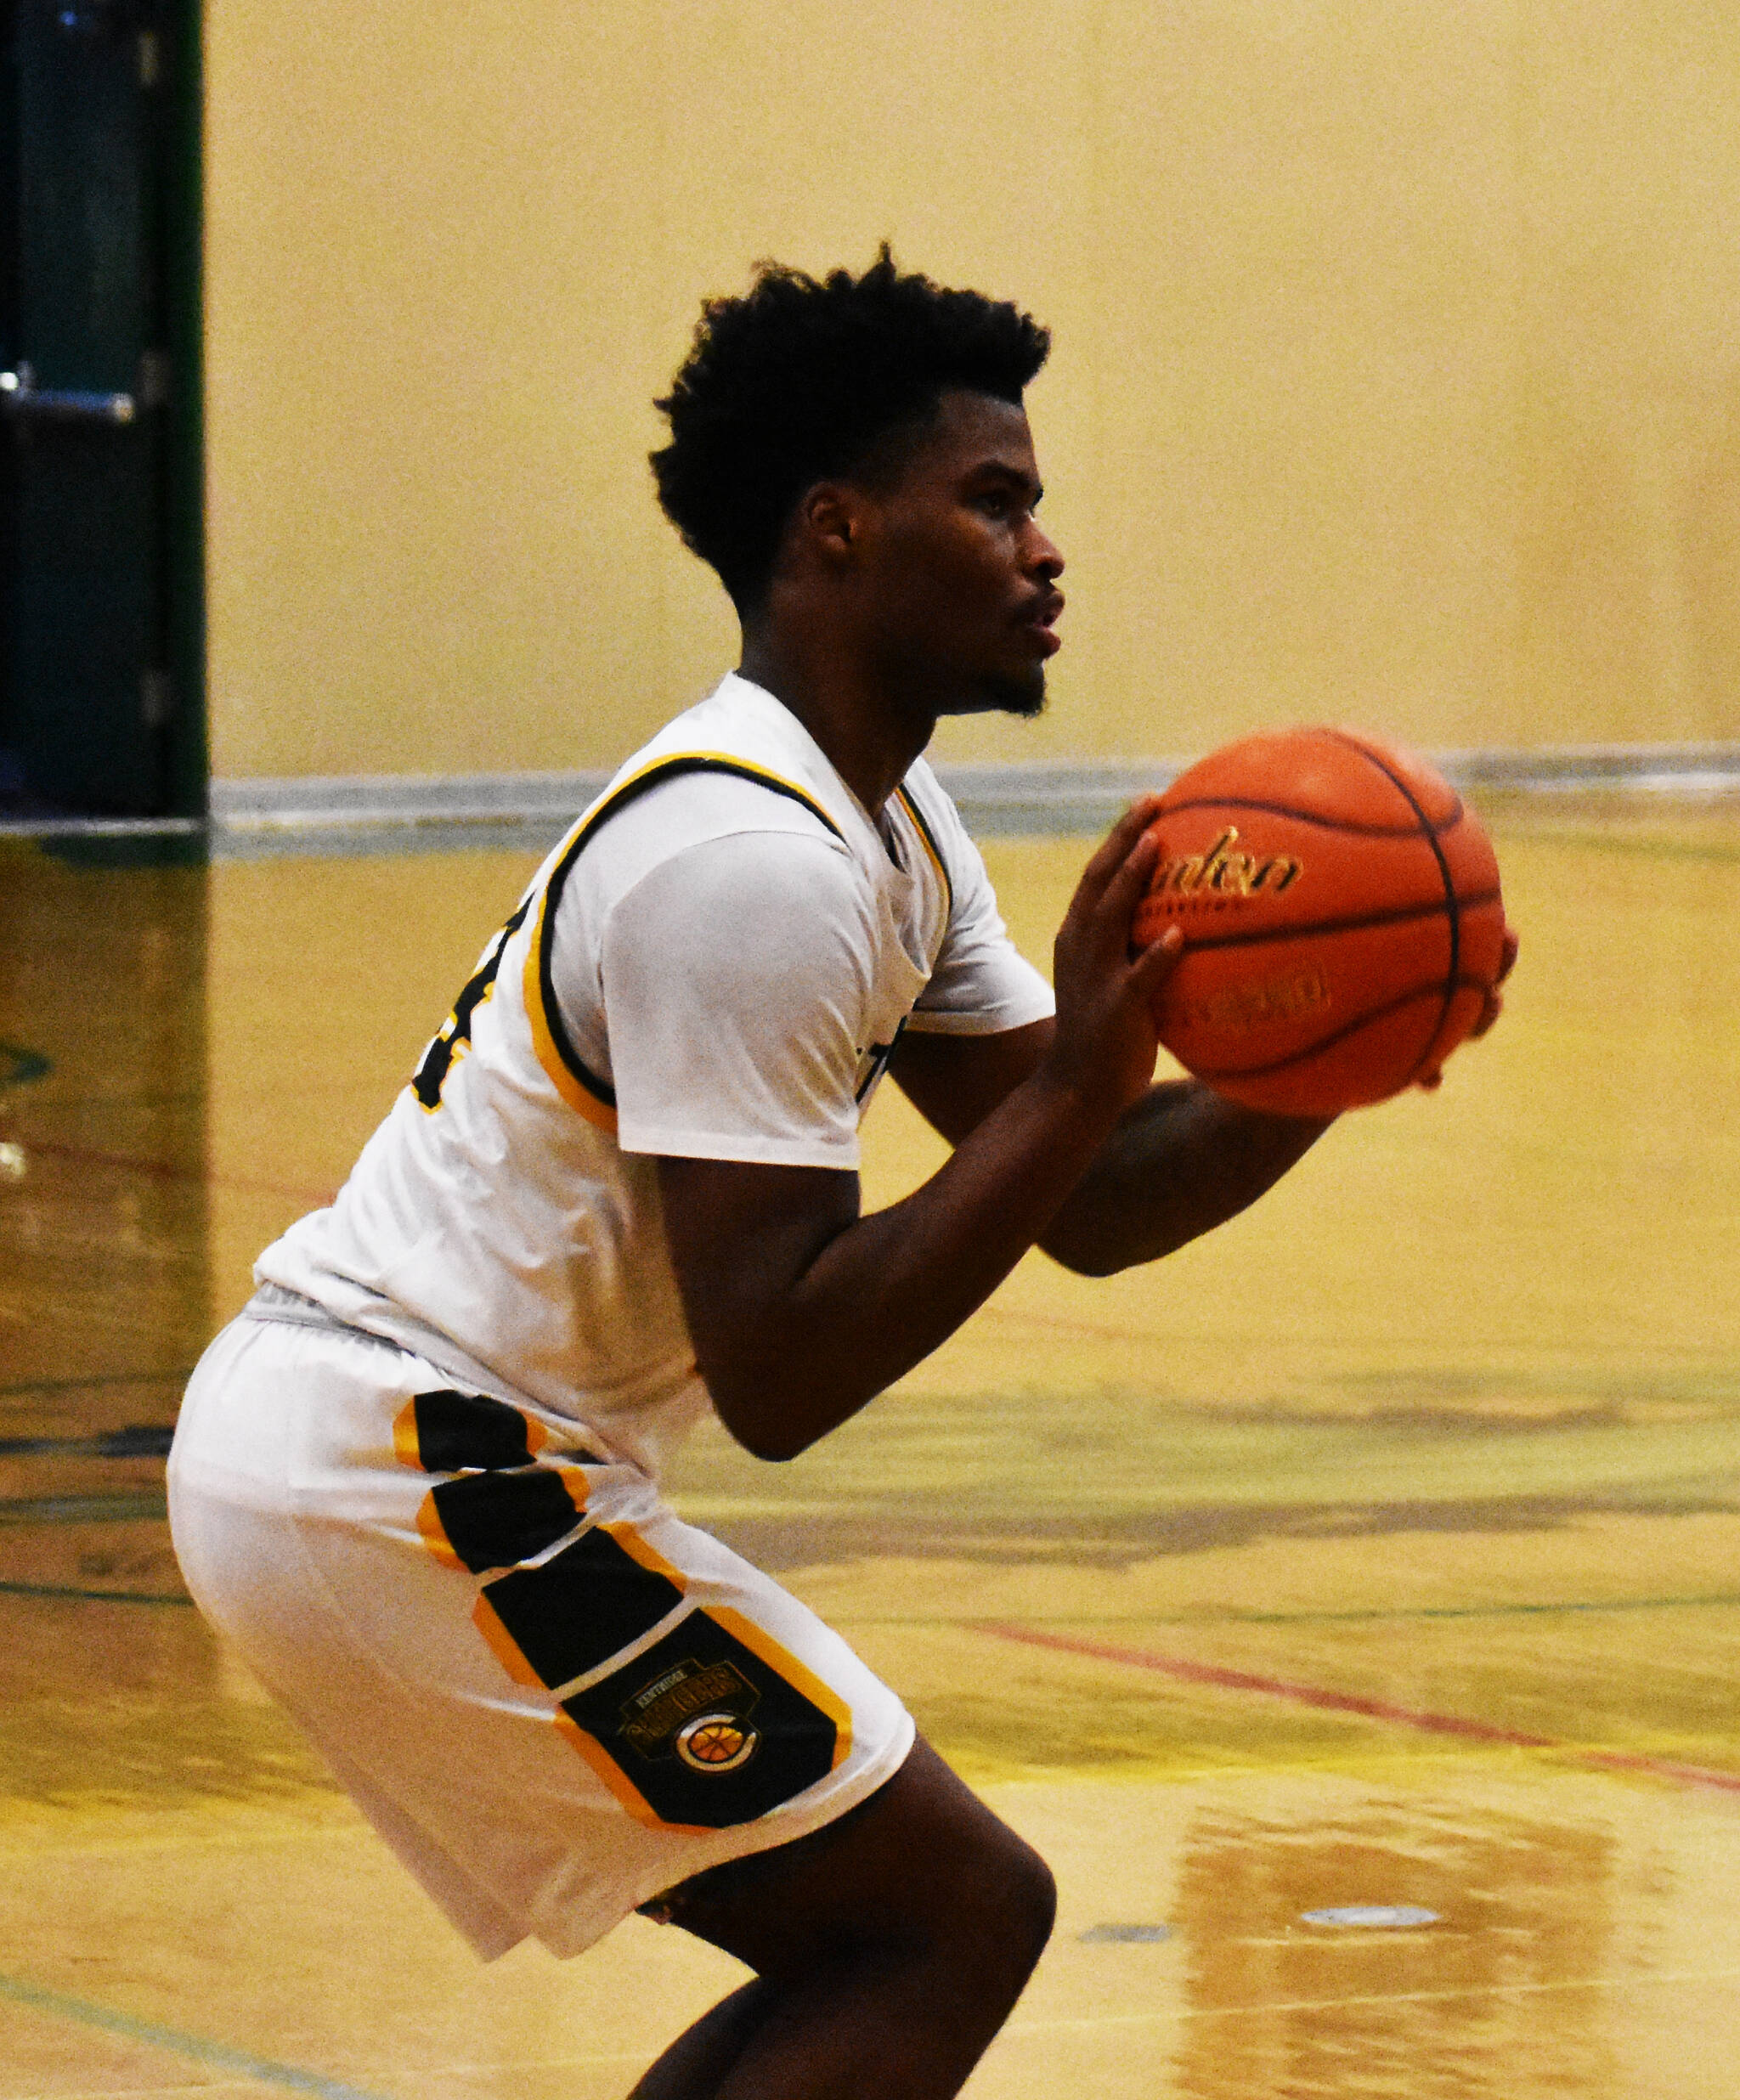 Elijah Cain, accused of the June 15 murder of Miles Clark in Kent, earned all-league honors during the 2022-2023 season as a member of the Kentridge High School boys basketball team. FILE PHOTO, Ben Ray, Sound Publishing
Elijah Cain earned all-league honors during the 2022-2023 season as a member of the Kentridge High School boys basketball team. FILE PHOTO, Sound Publishing